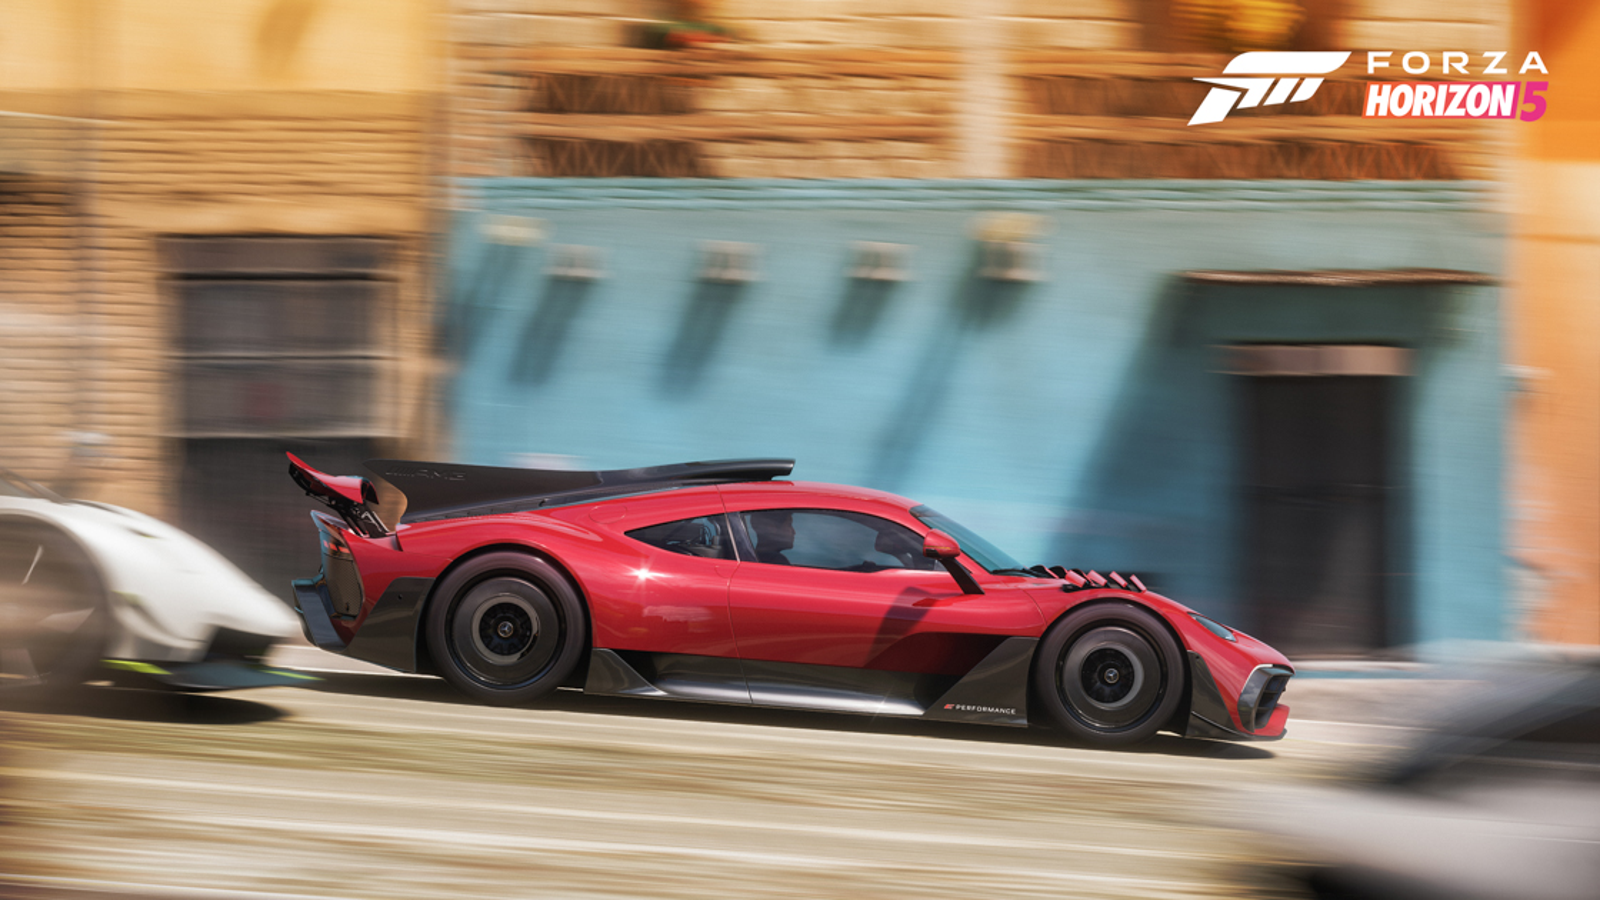 Forza Horizon on X: Get all the details on the arrival of Forza